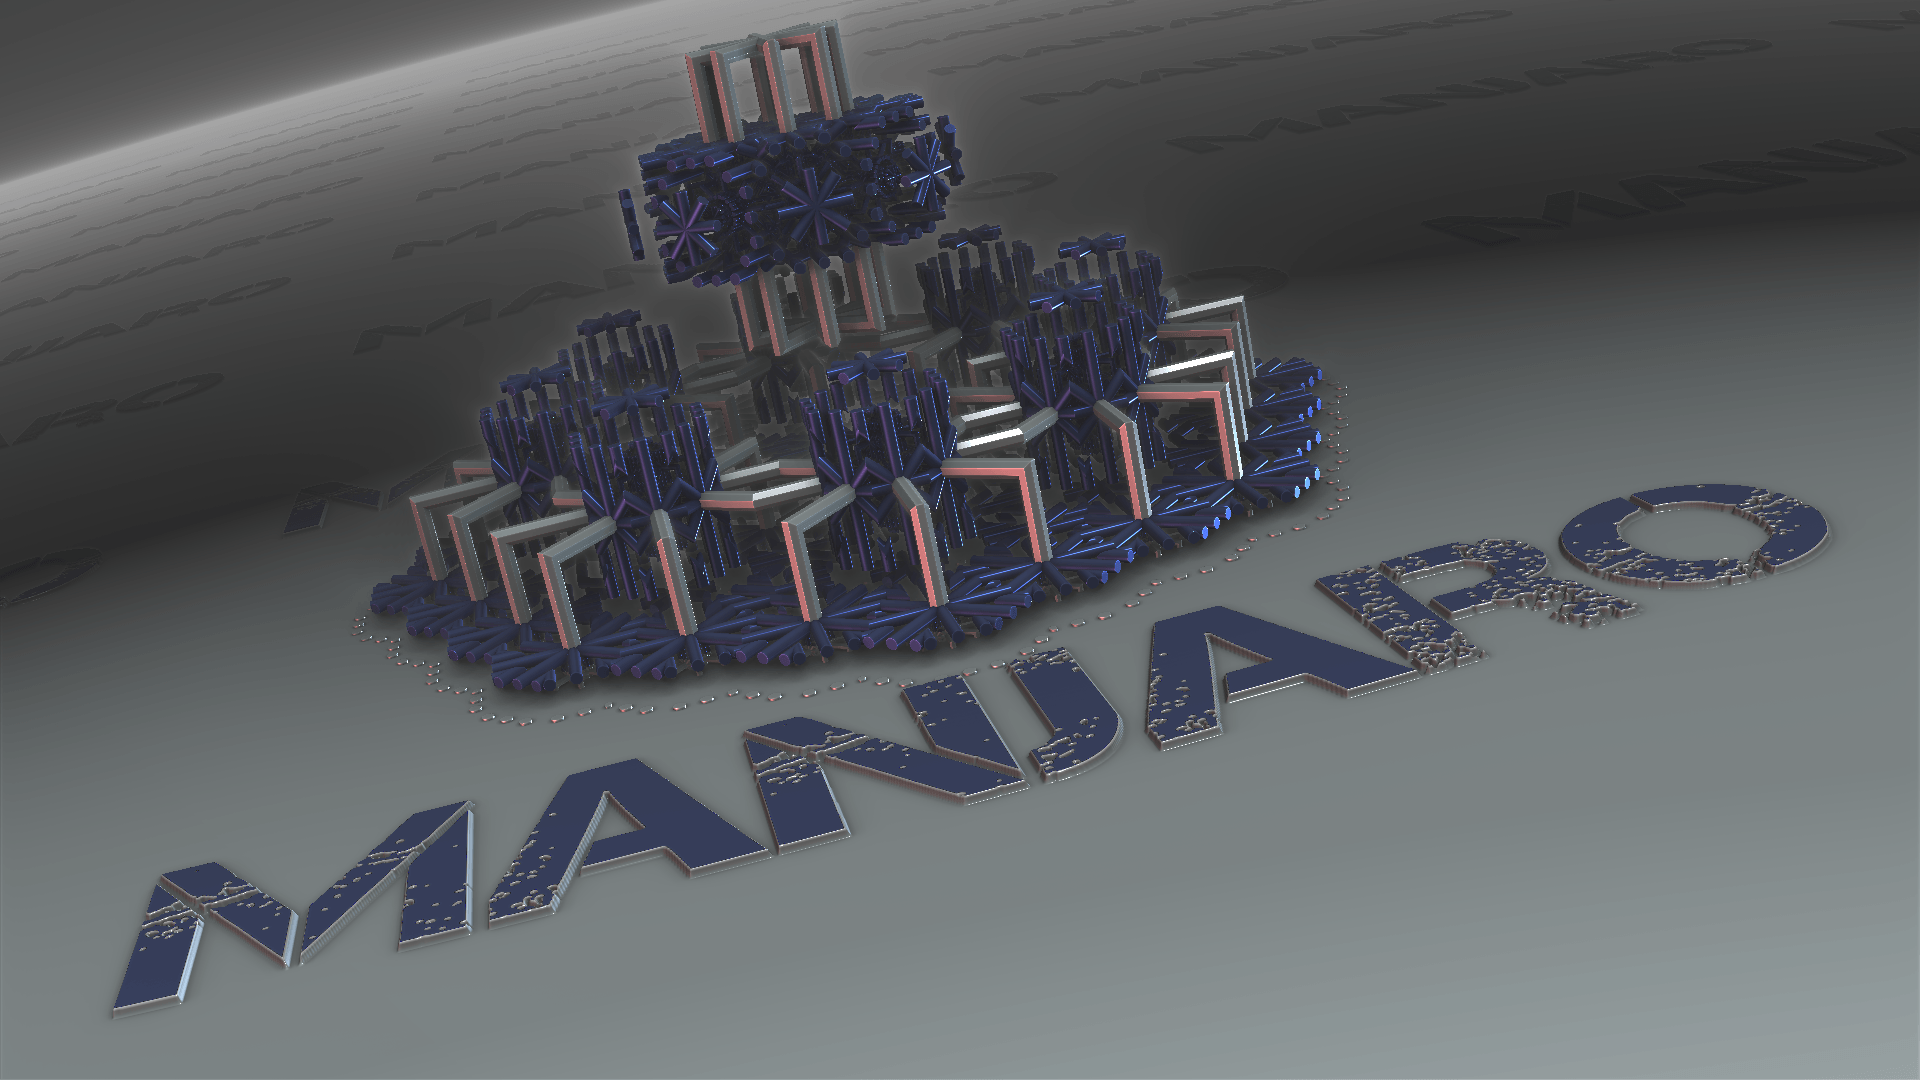 Some of my Manjaro and Linux fractal wallpaper